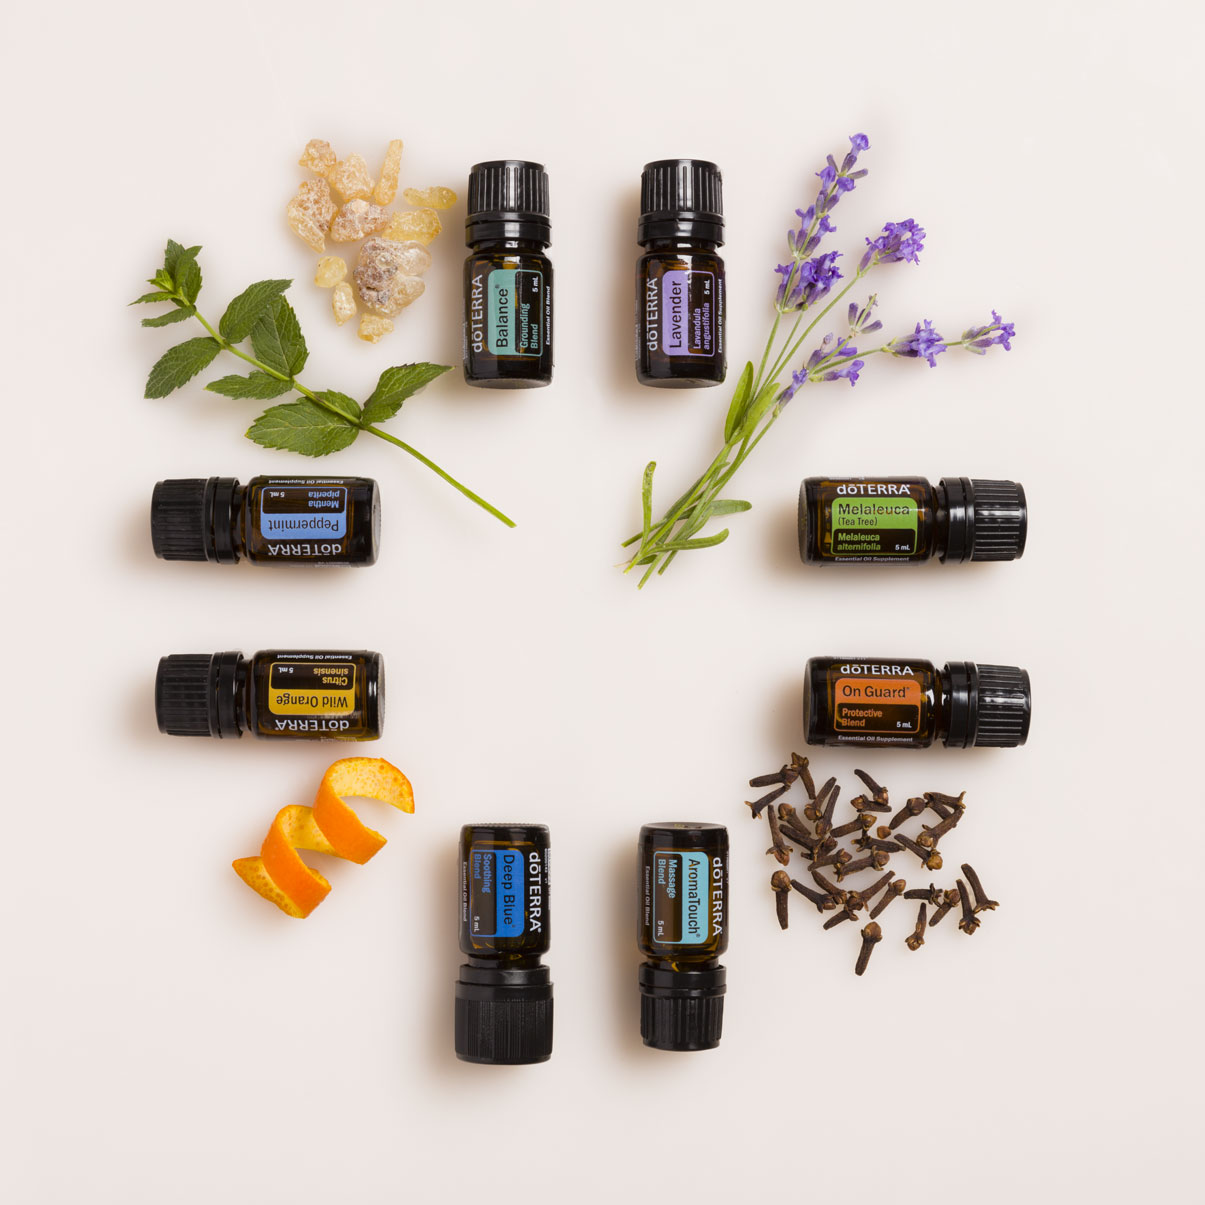 doTerra Aromatouch Technique - Leona McDonnell Mindfulness and Wellness